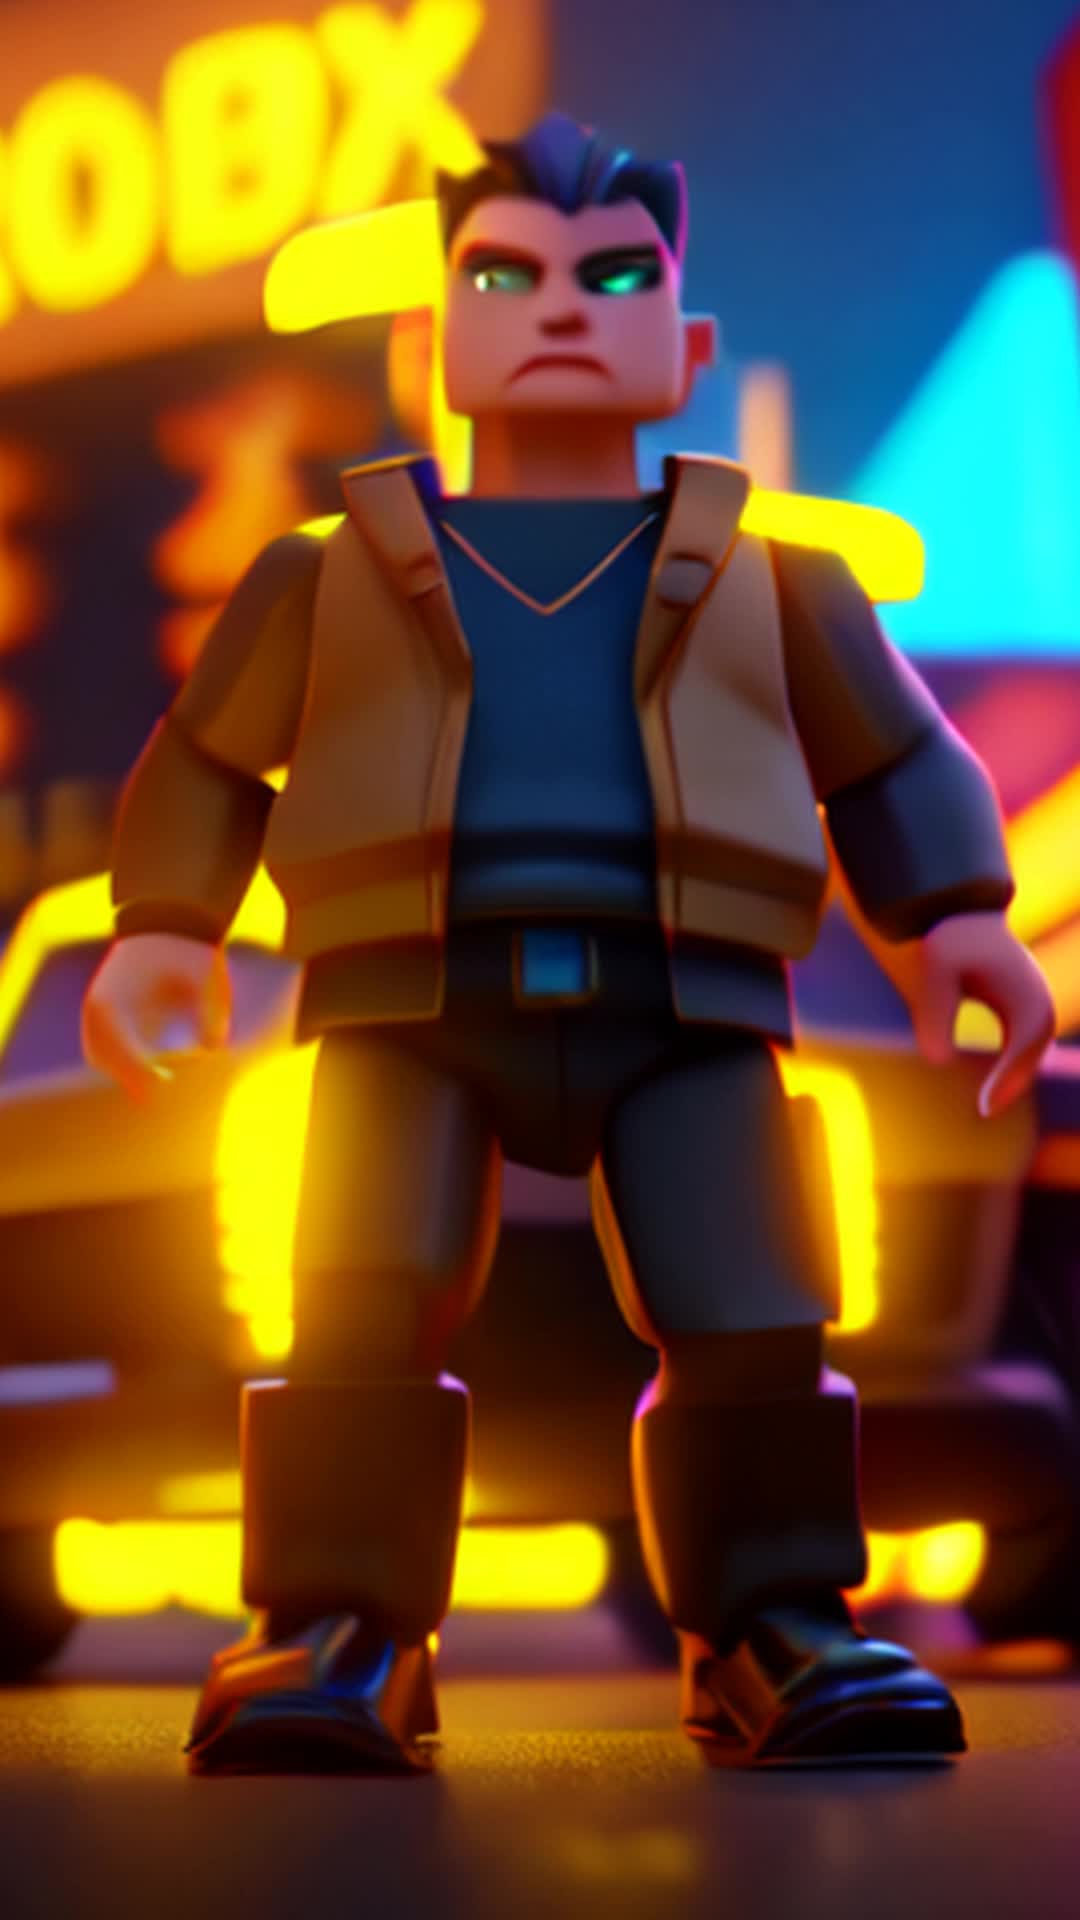 Futuristic Roblox character, sleek and advanced design, highly detailed and sharp focus, vibrant neon colors, immersive cityscape background, futuristic vehicles and buildings, dynamic action poses, complex animations, energetic atmosphere, glowing holographic interfaces, soft shadows, high resolution, rendered by octane, cinematic feel, full body shots, various angles, prime form, Roblox game commercial dynamic Roblox background 